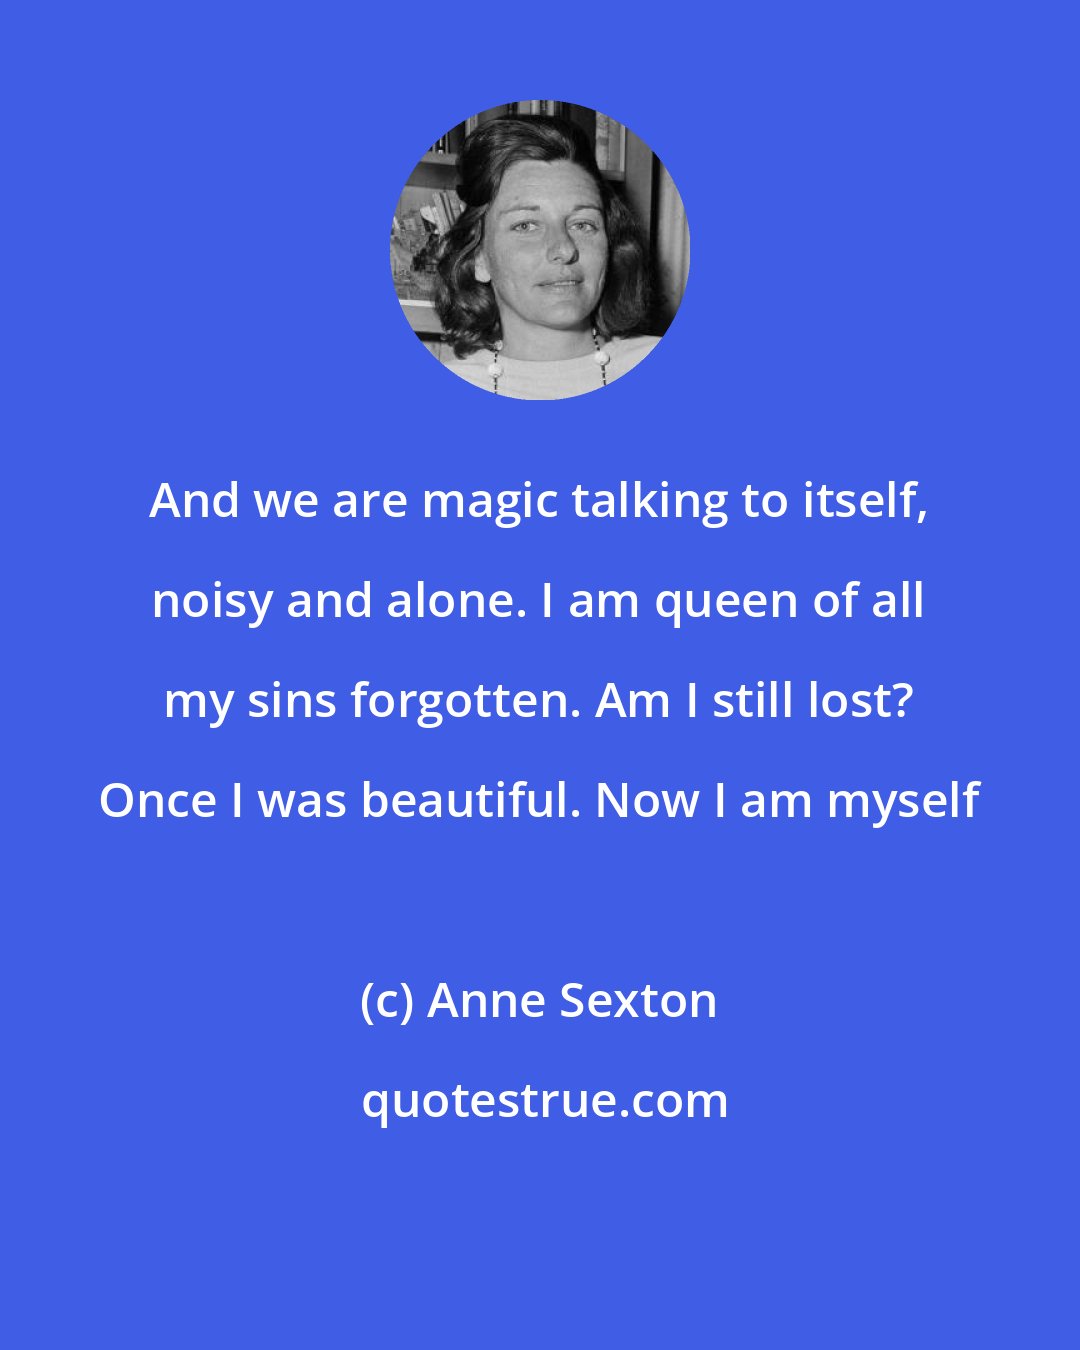 Anne Sexton: And we are magic talking to itself, noisy and alone. I am queen of all my sins forgotten. Am I still lost? Once I was beautiful. Now I am myself